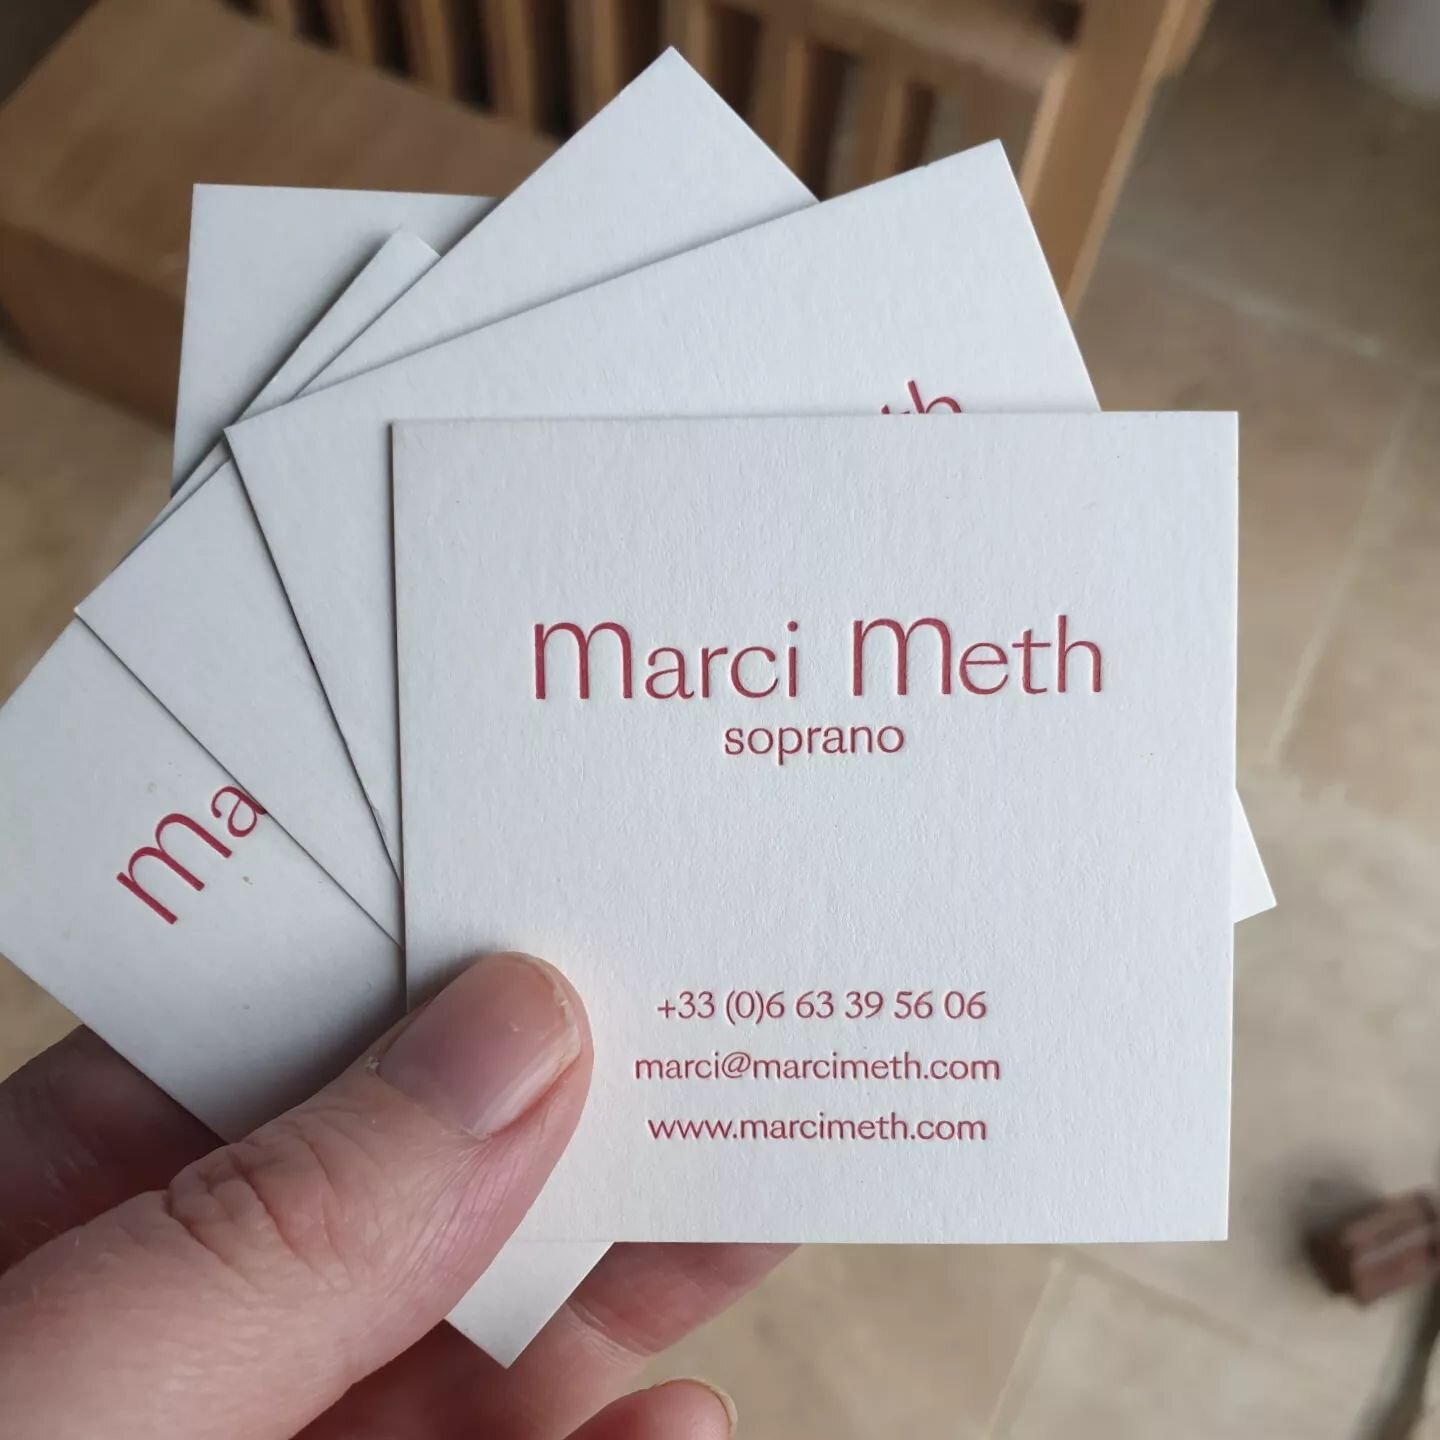 BUSINESS CARDS PRINTING

We have had a few enquiries recently as to whether we are still printing business cards,

The answer is : Y E S 

Sharing an old favourite of mine, a really classic design that shows off the letterpress print process perfectl